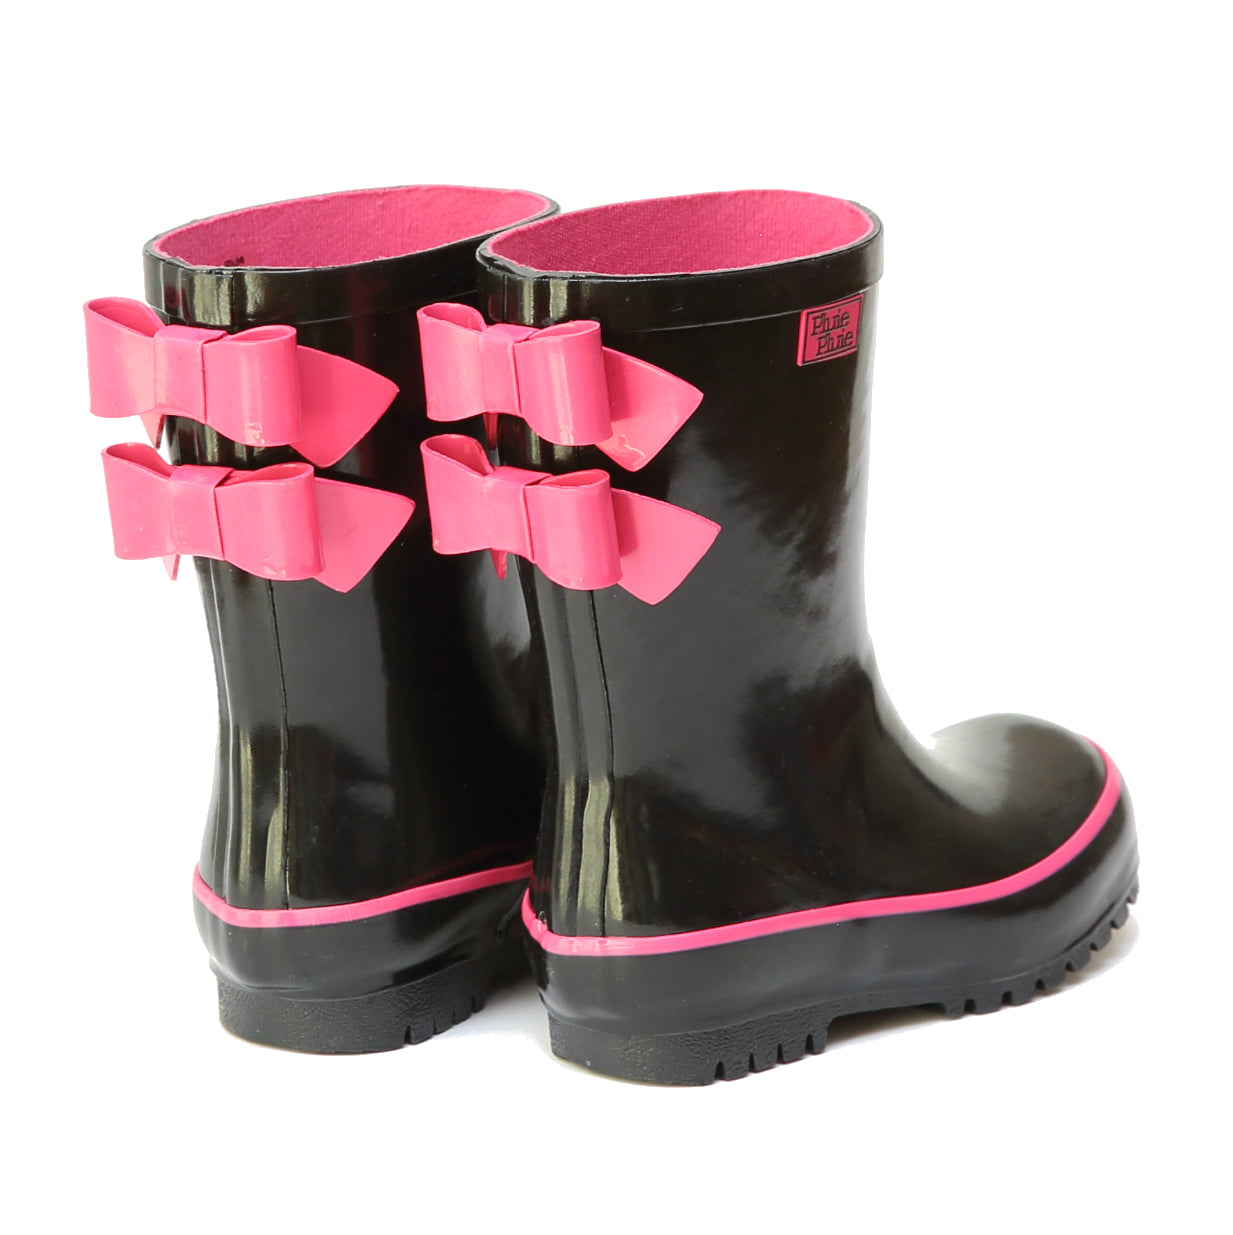 pink rain boots with bow